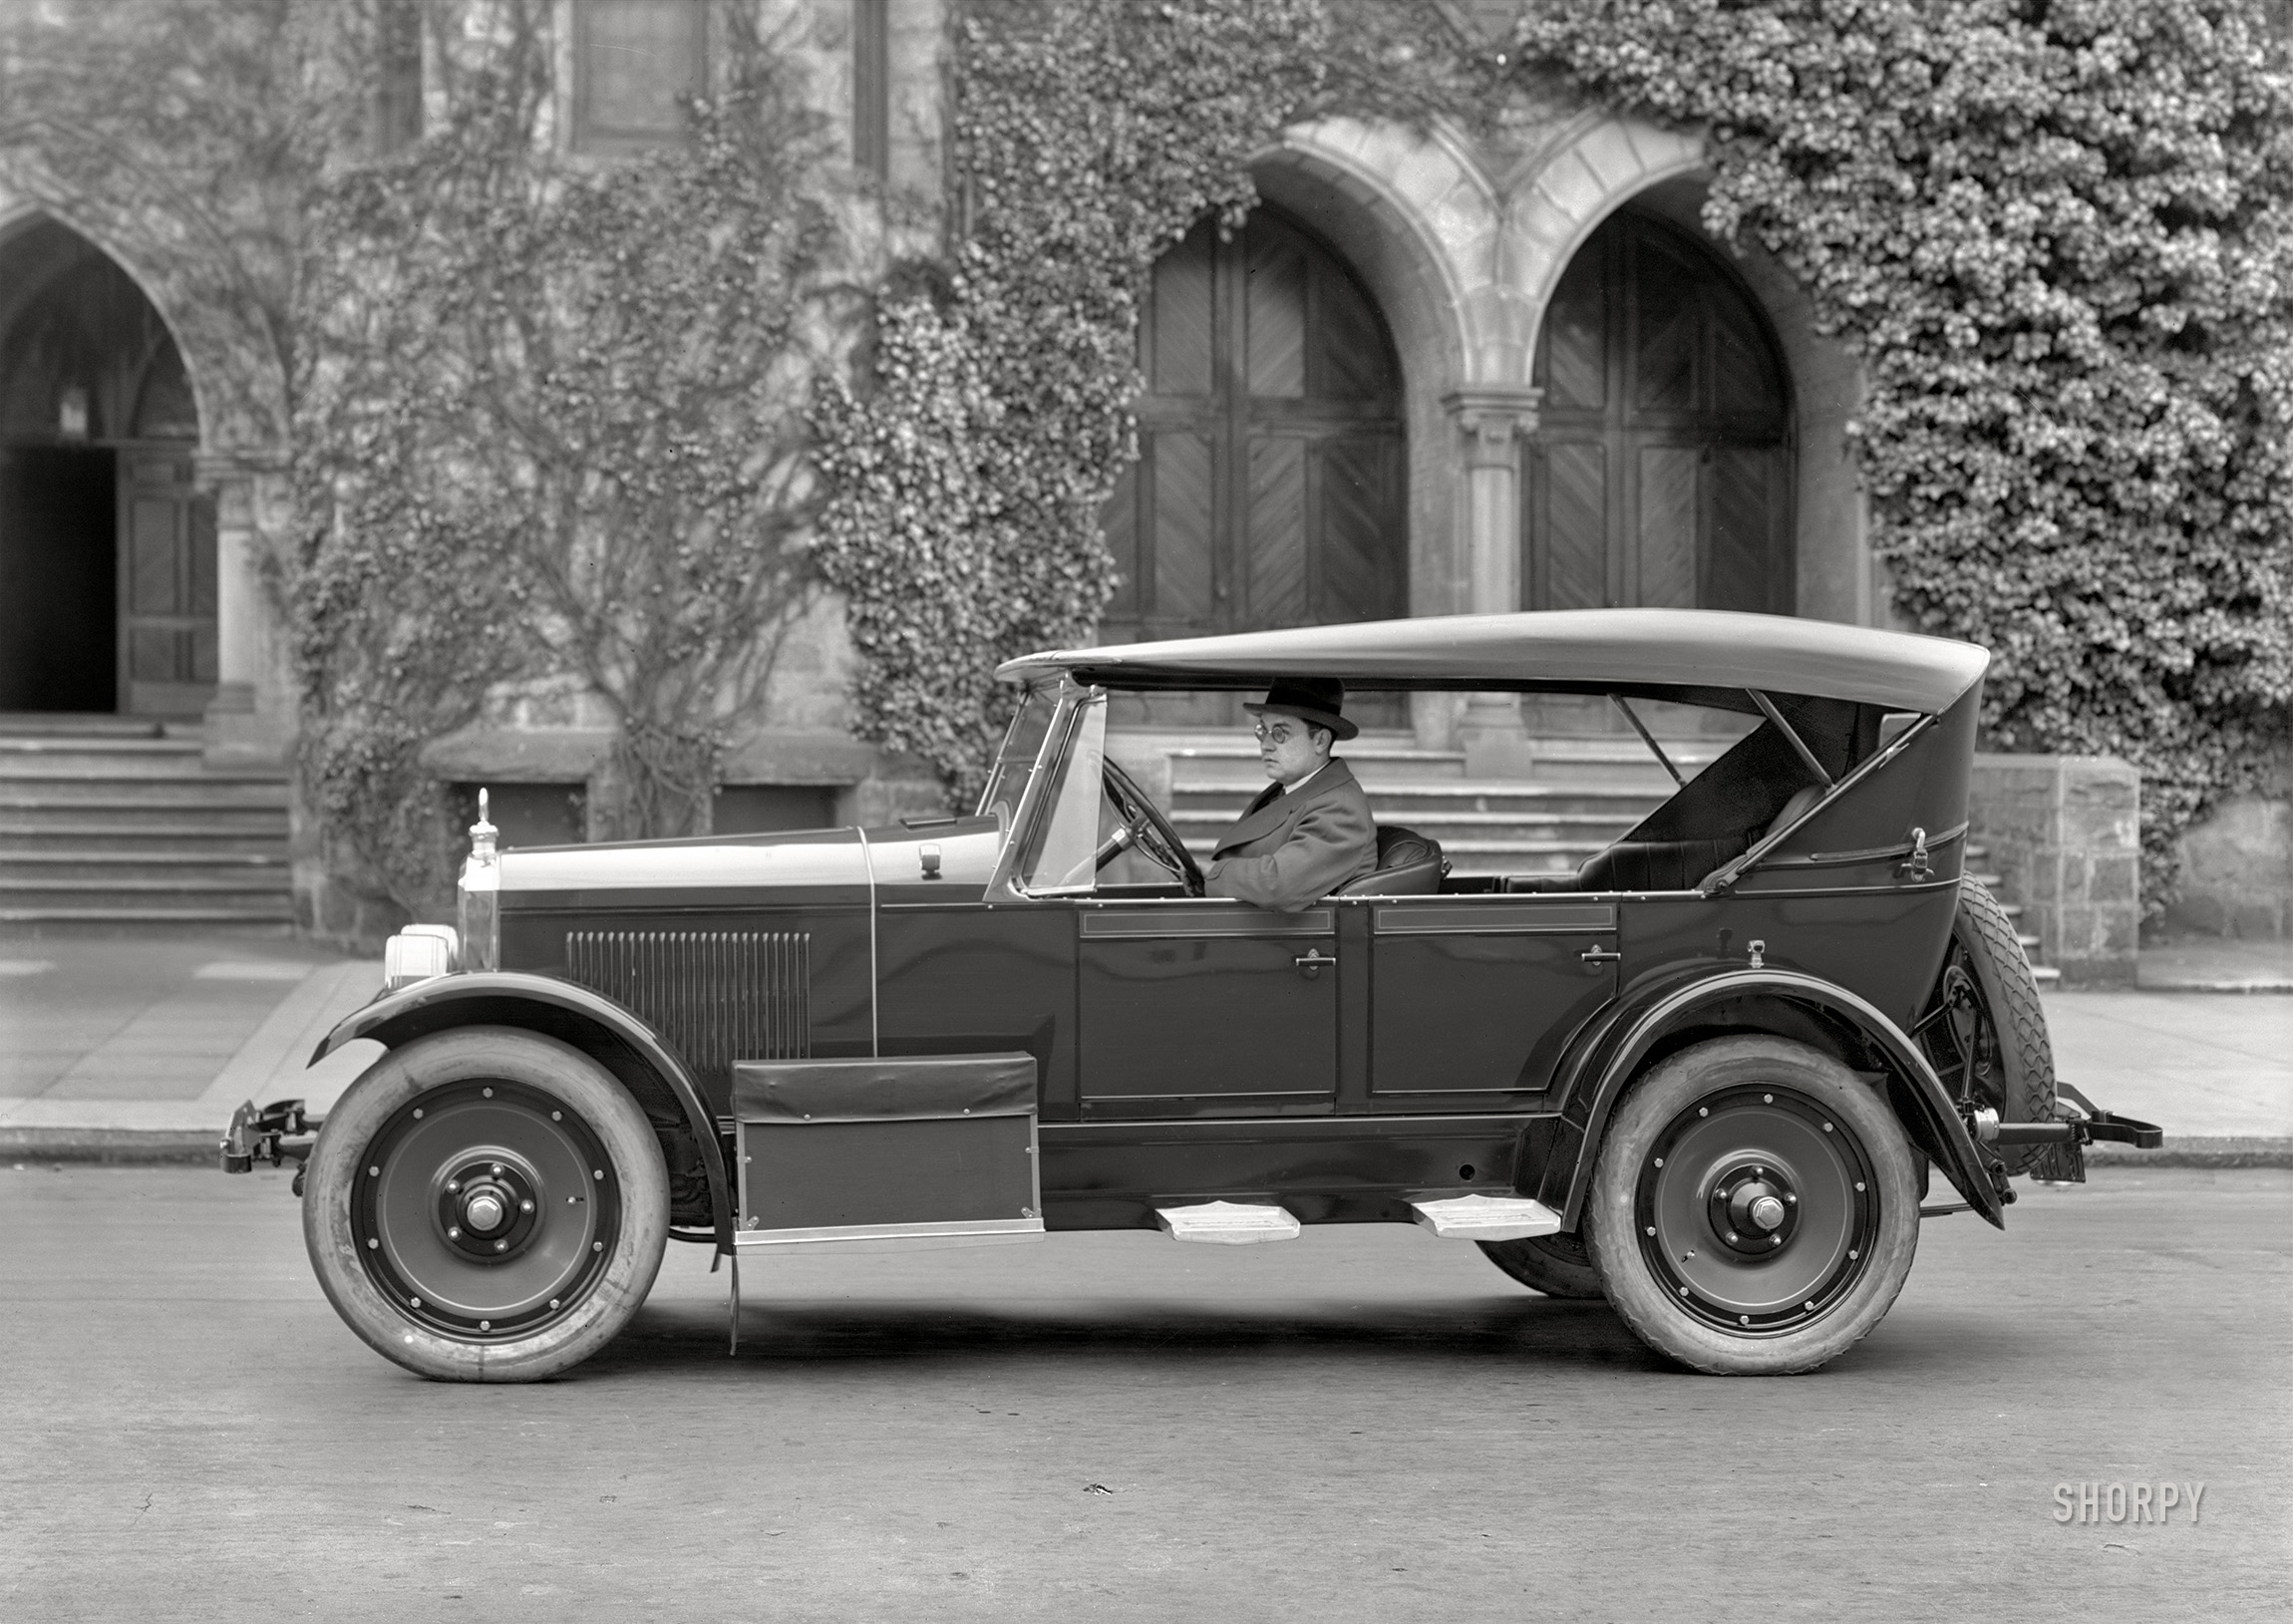 San Francisco, 1923. "Auburn 'Beauty-Six' Model 6-39 touring car at First Unitarian Church." Today's selection from the Shorpy Inventory of Idling Autos. 5x7 glass negative. View full size.